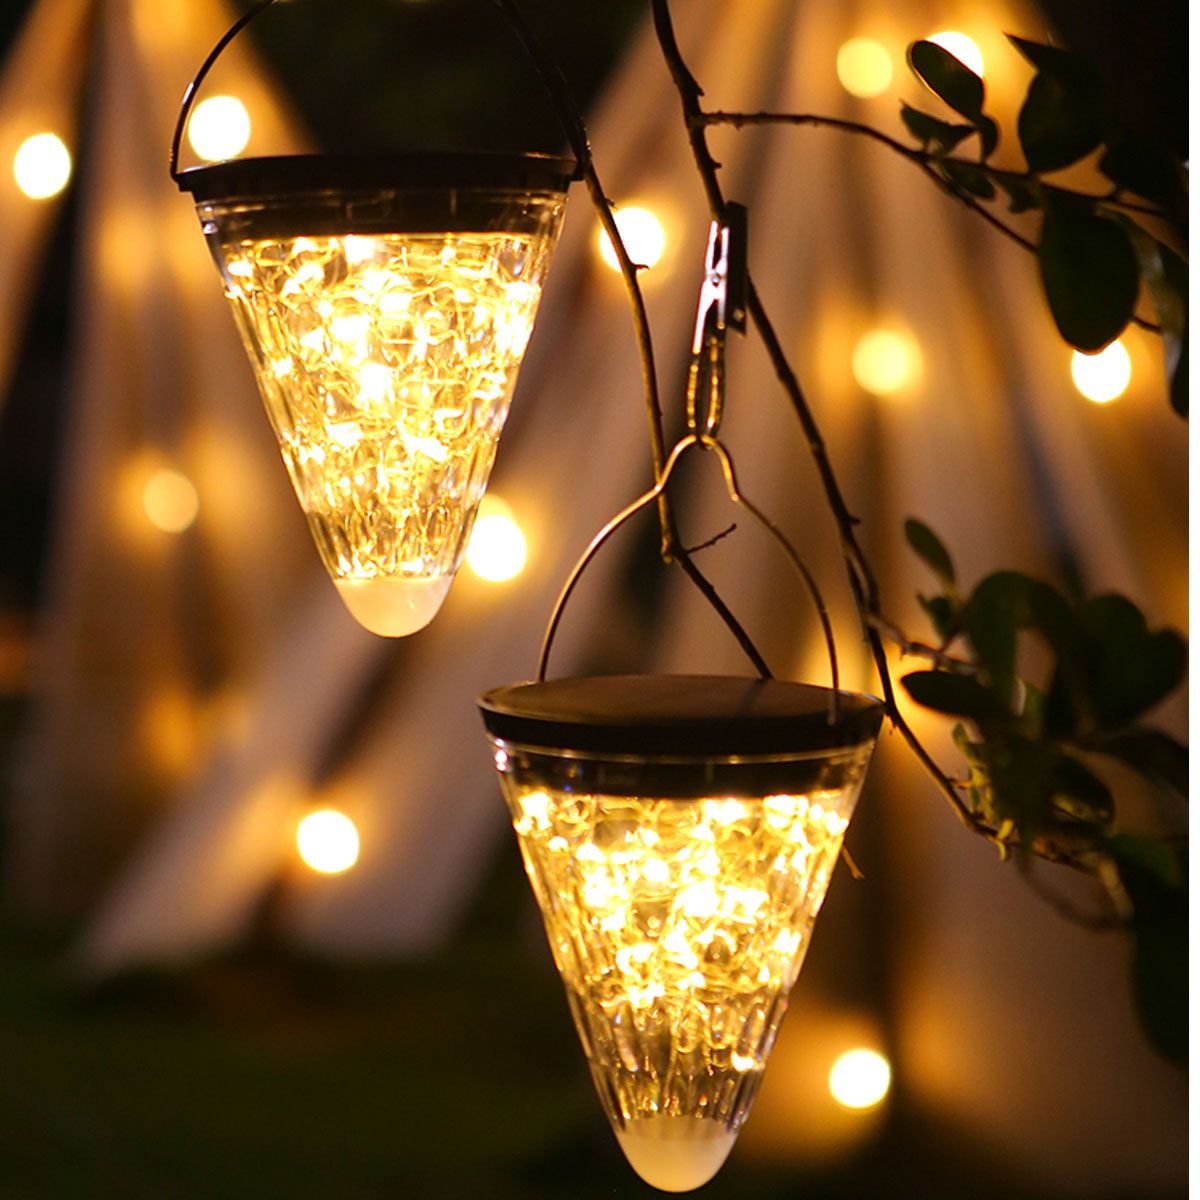 Wind-Chimes-Solar-Powered-LED-Light-Changing-Hanging-Garden-Yard-Outdoor-Decor-1726611